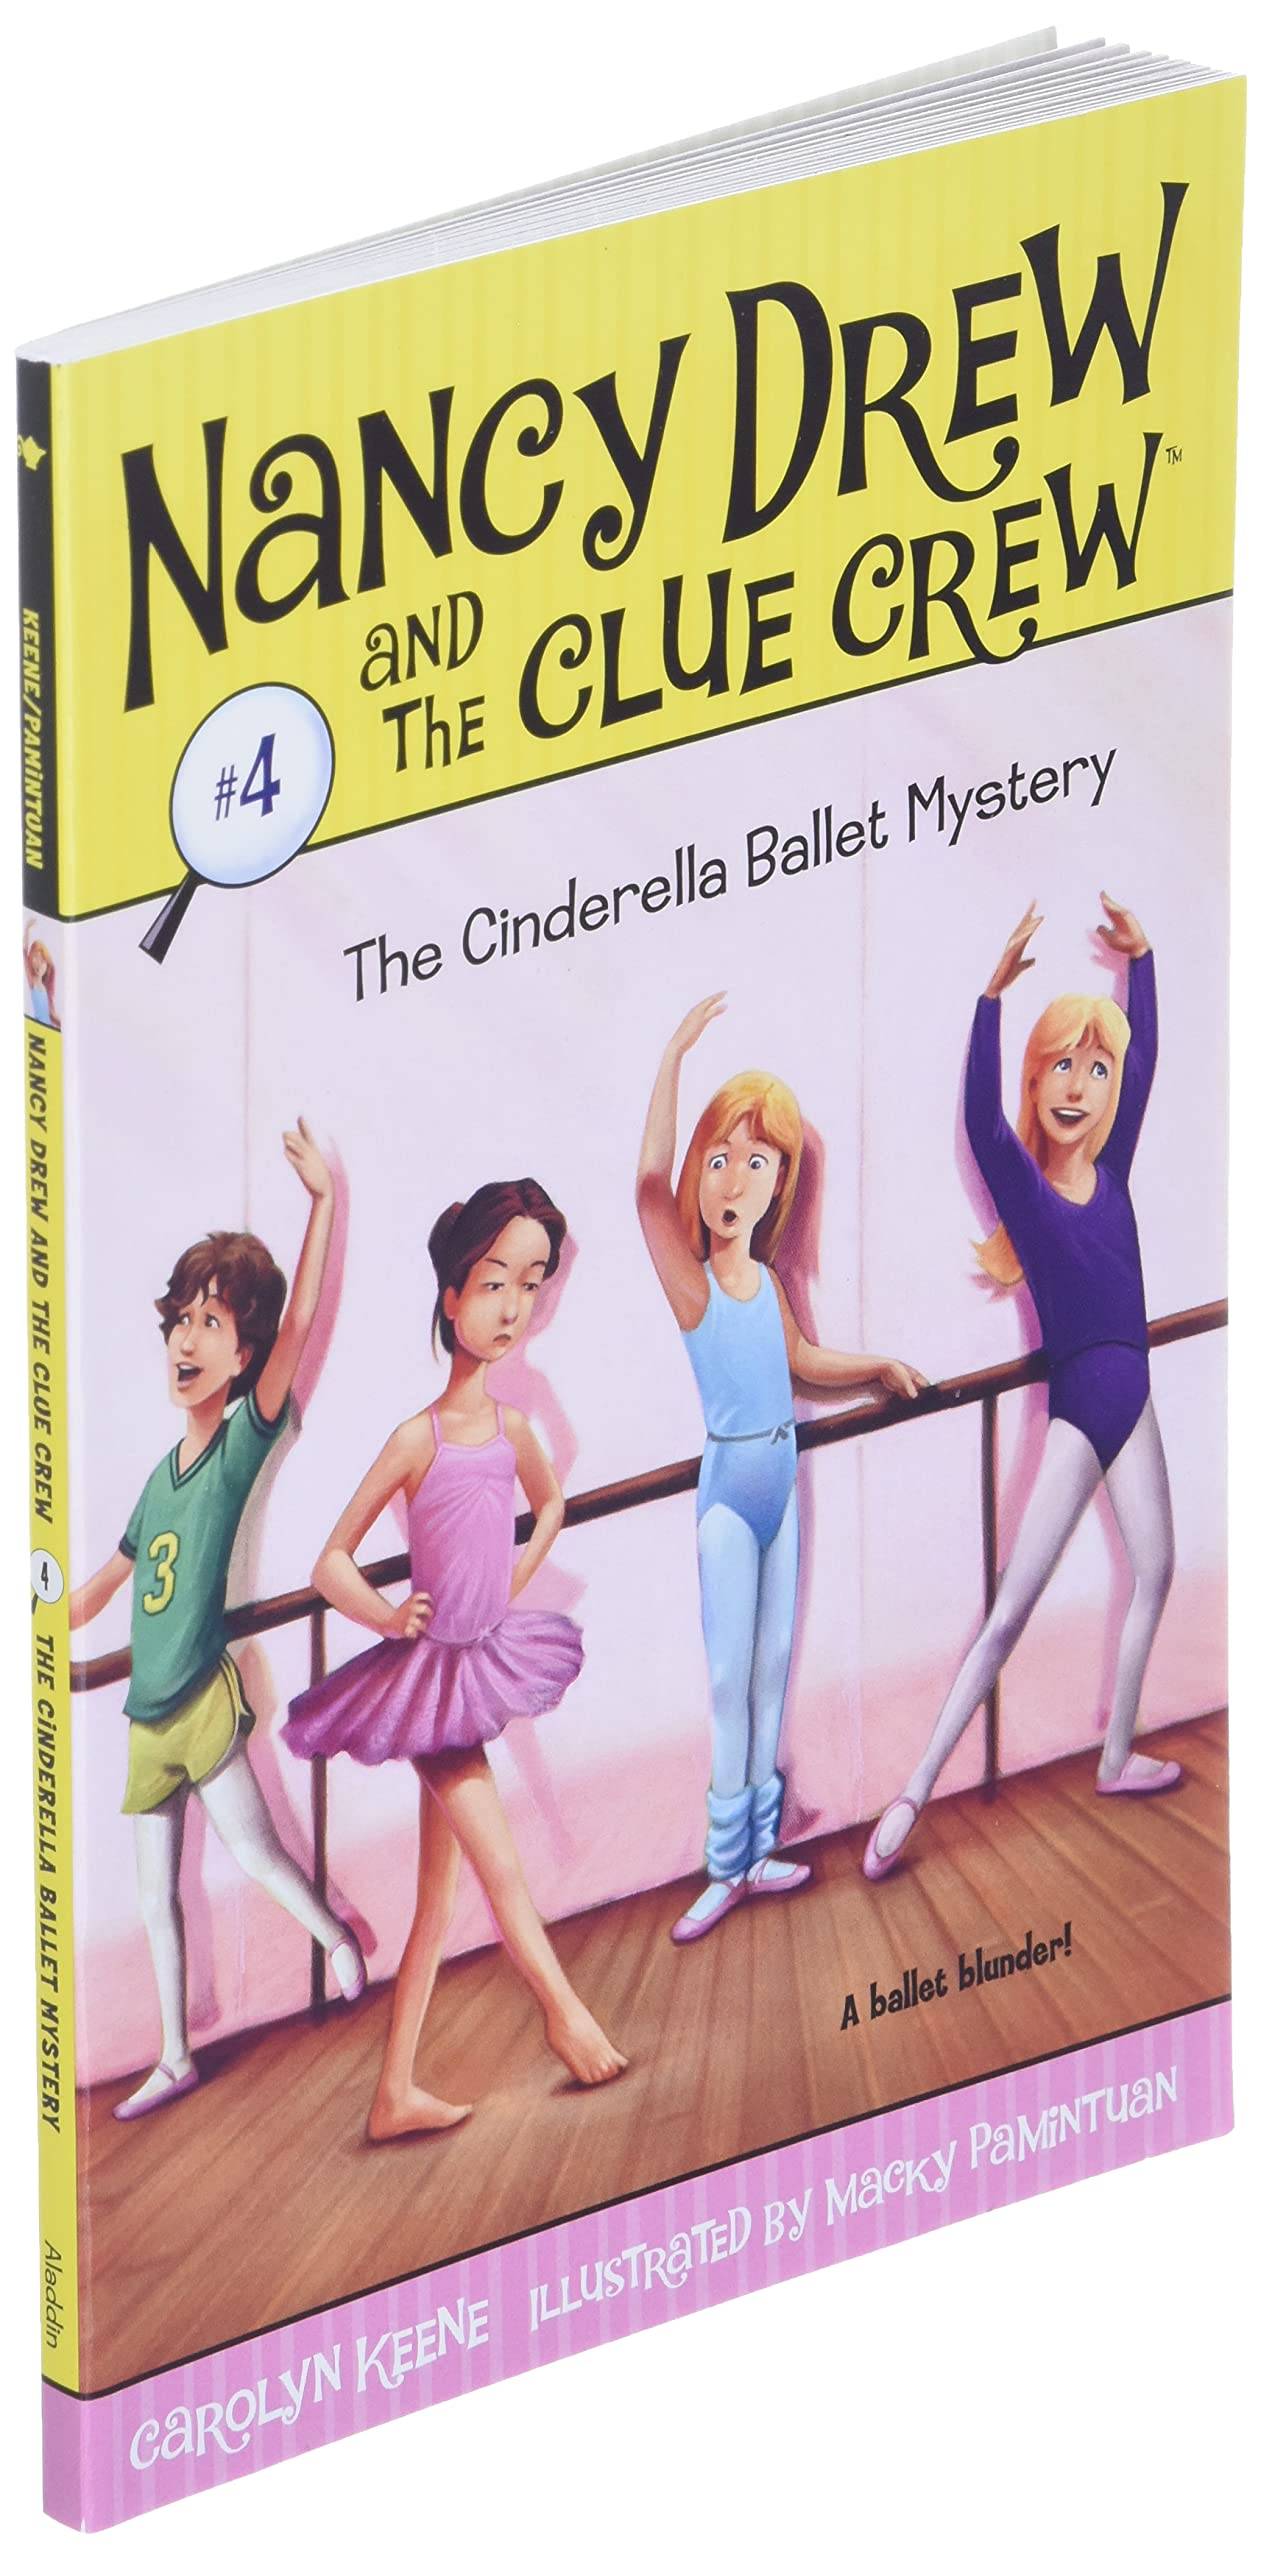 IMG : The Nancy Drew and the Clue Crew The Cinderella Ballet Mystery #4